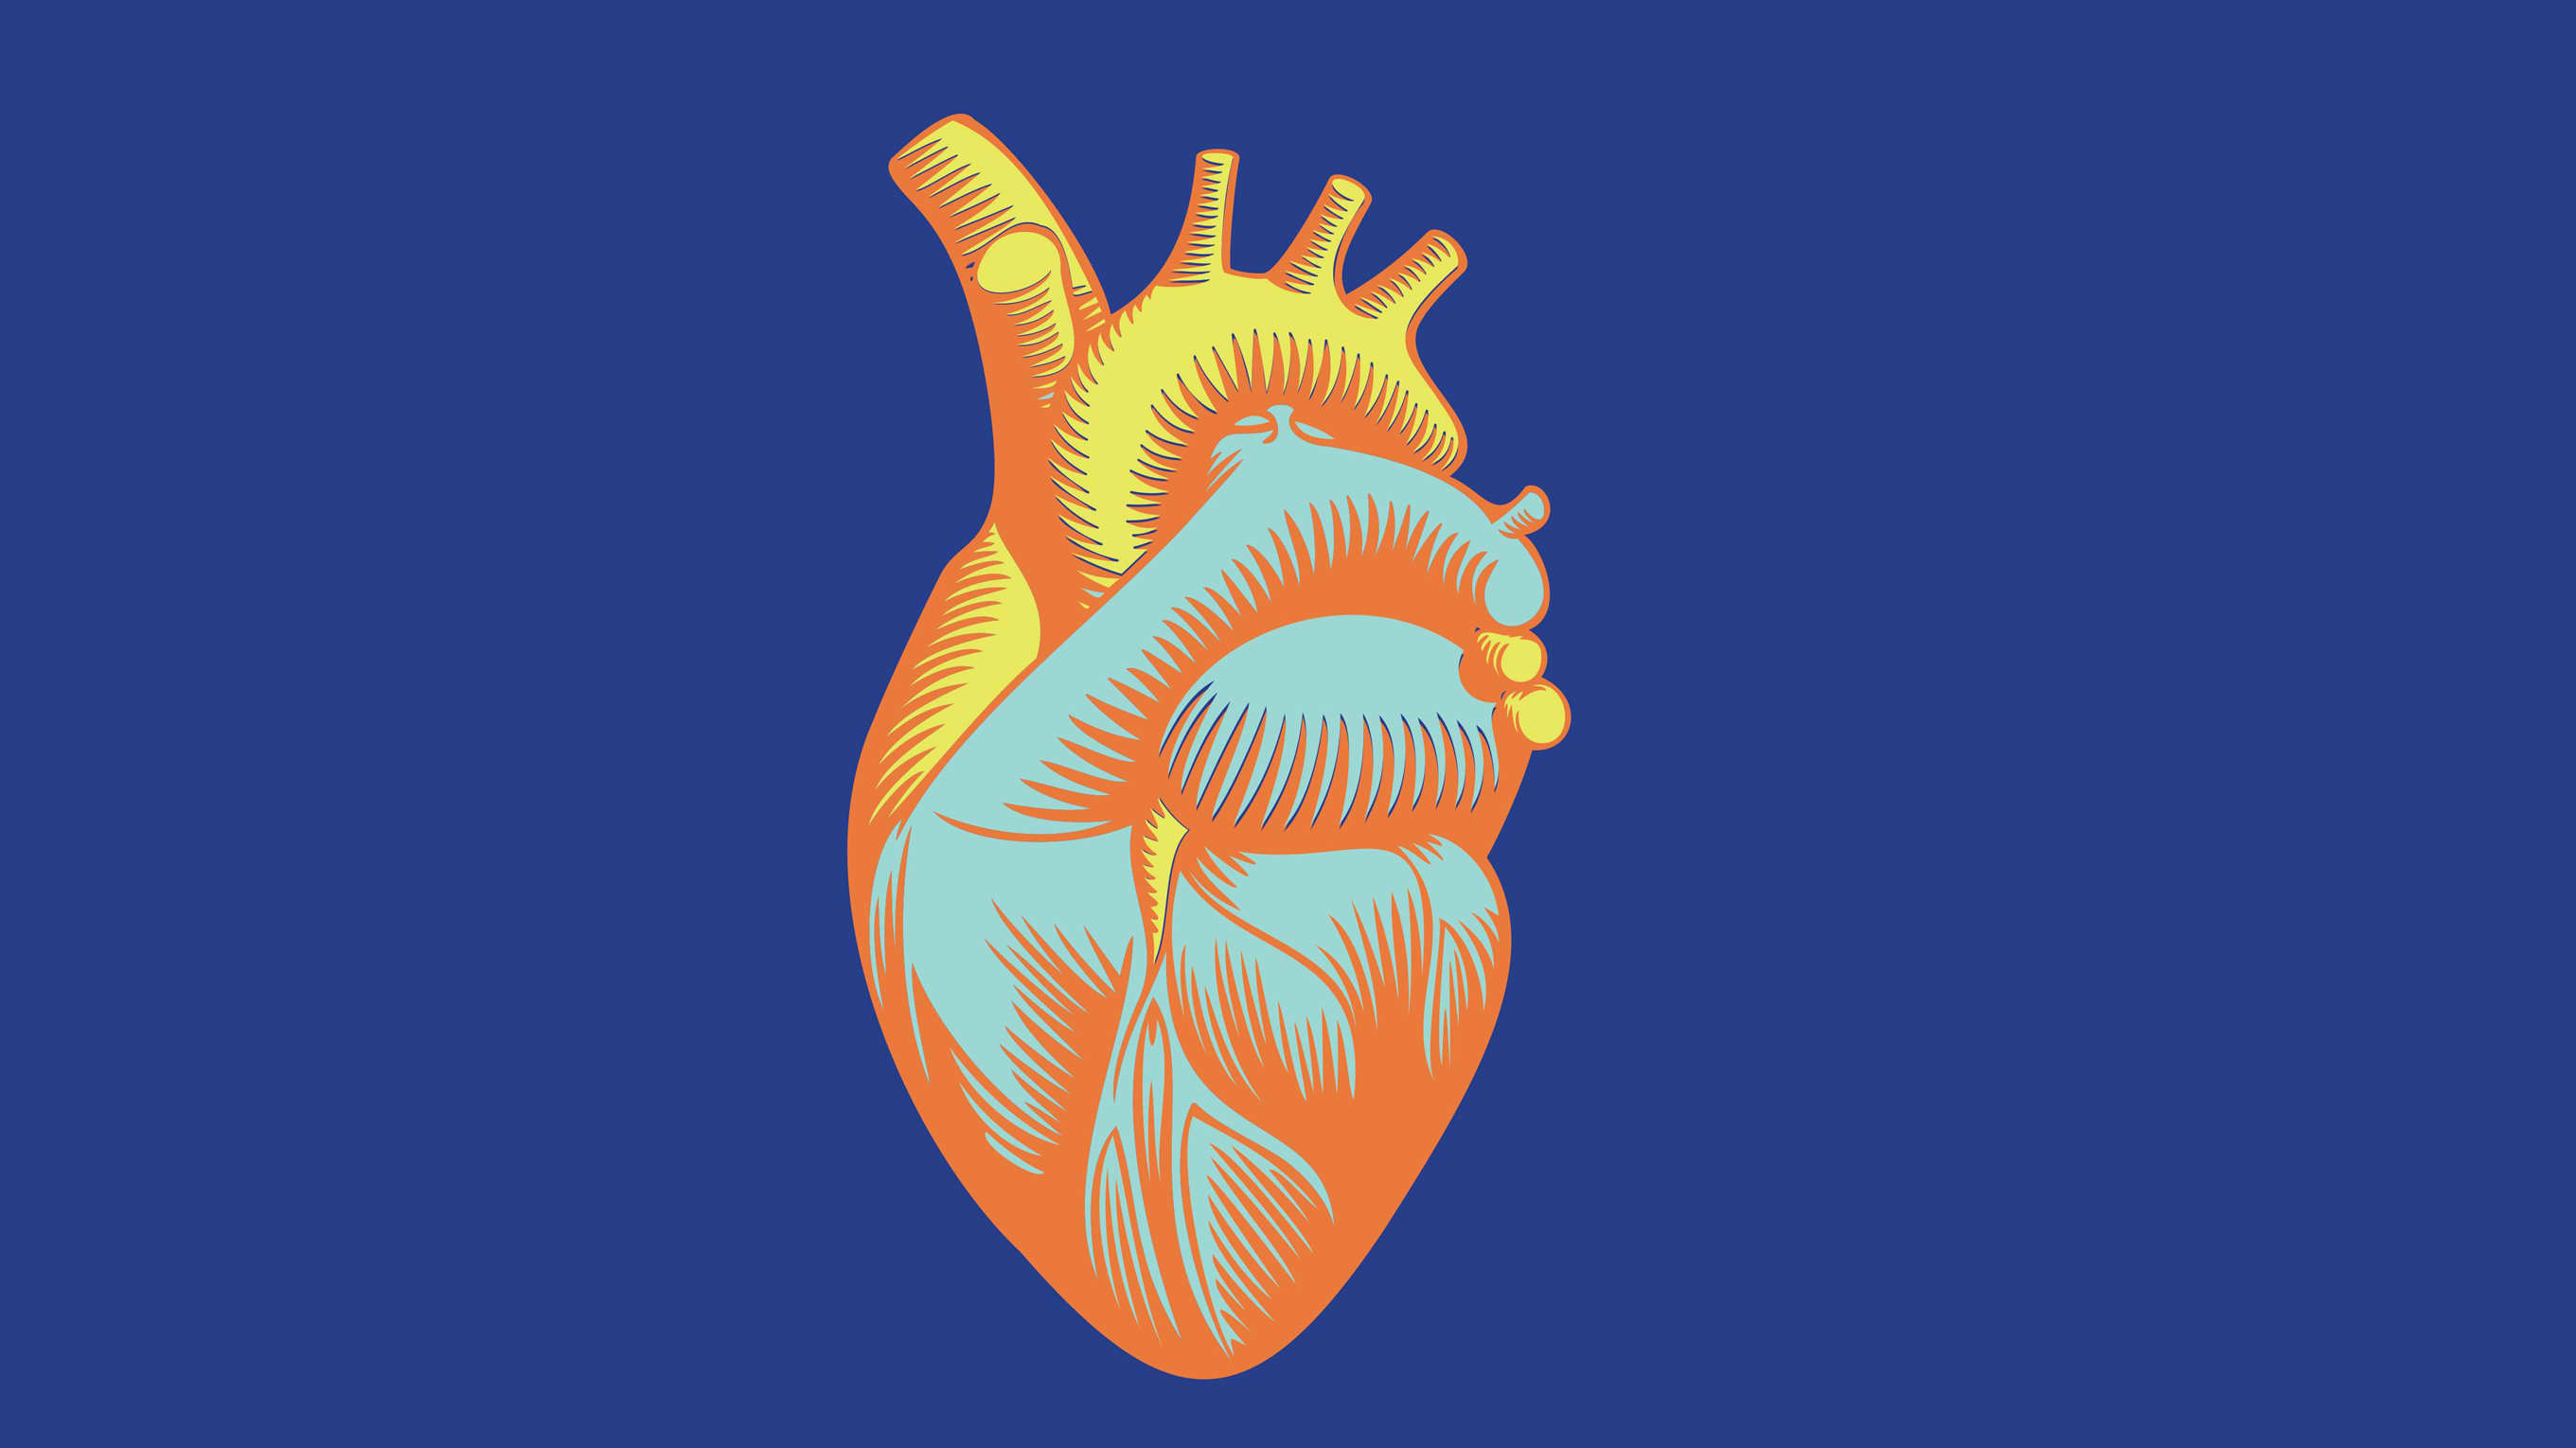 Anatomical illustration of an orange and blue heart on a royal blue background.